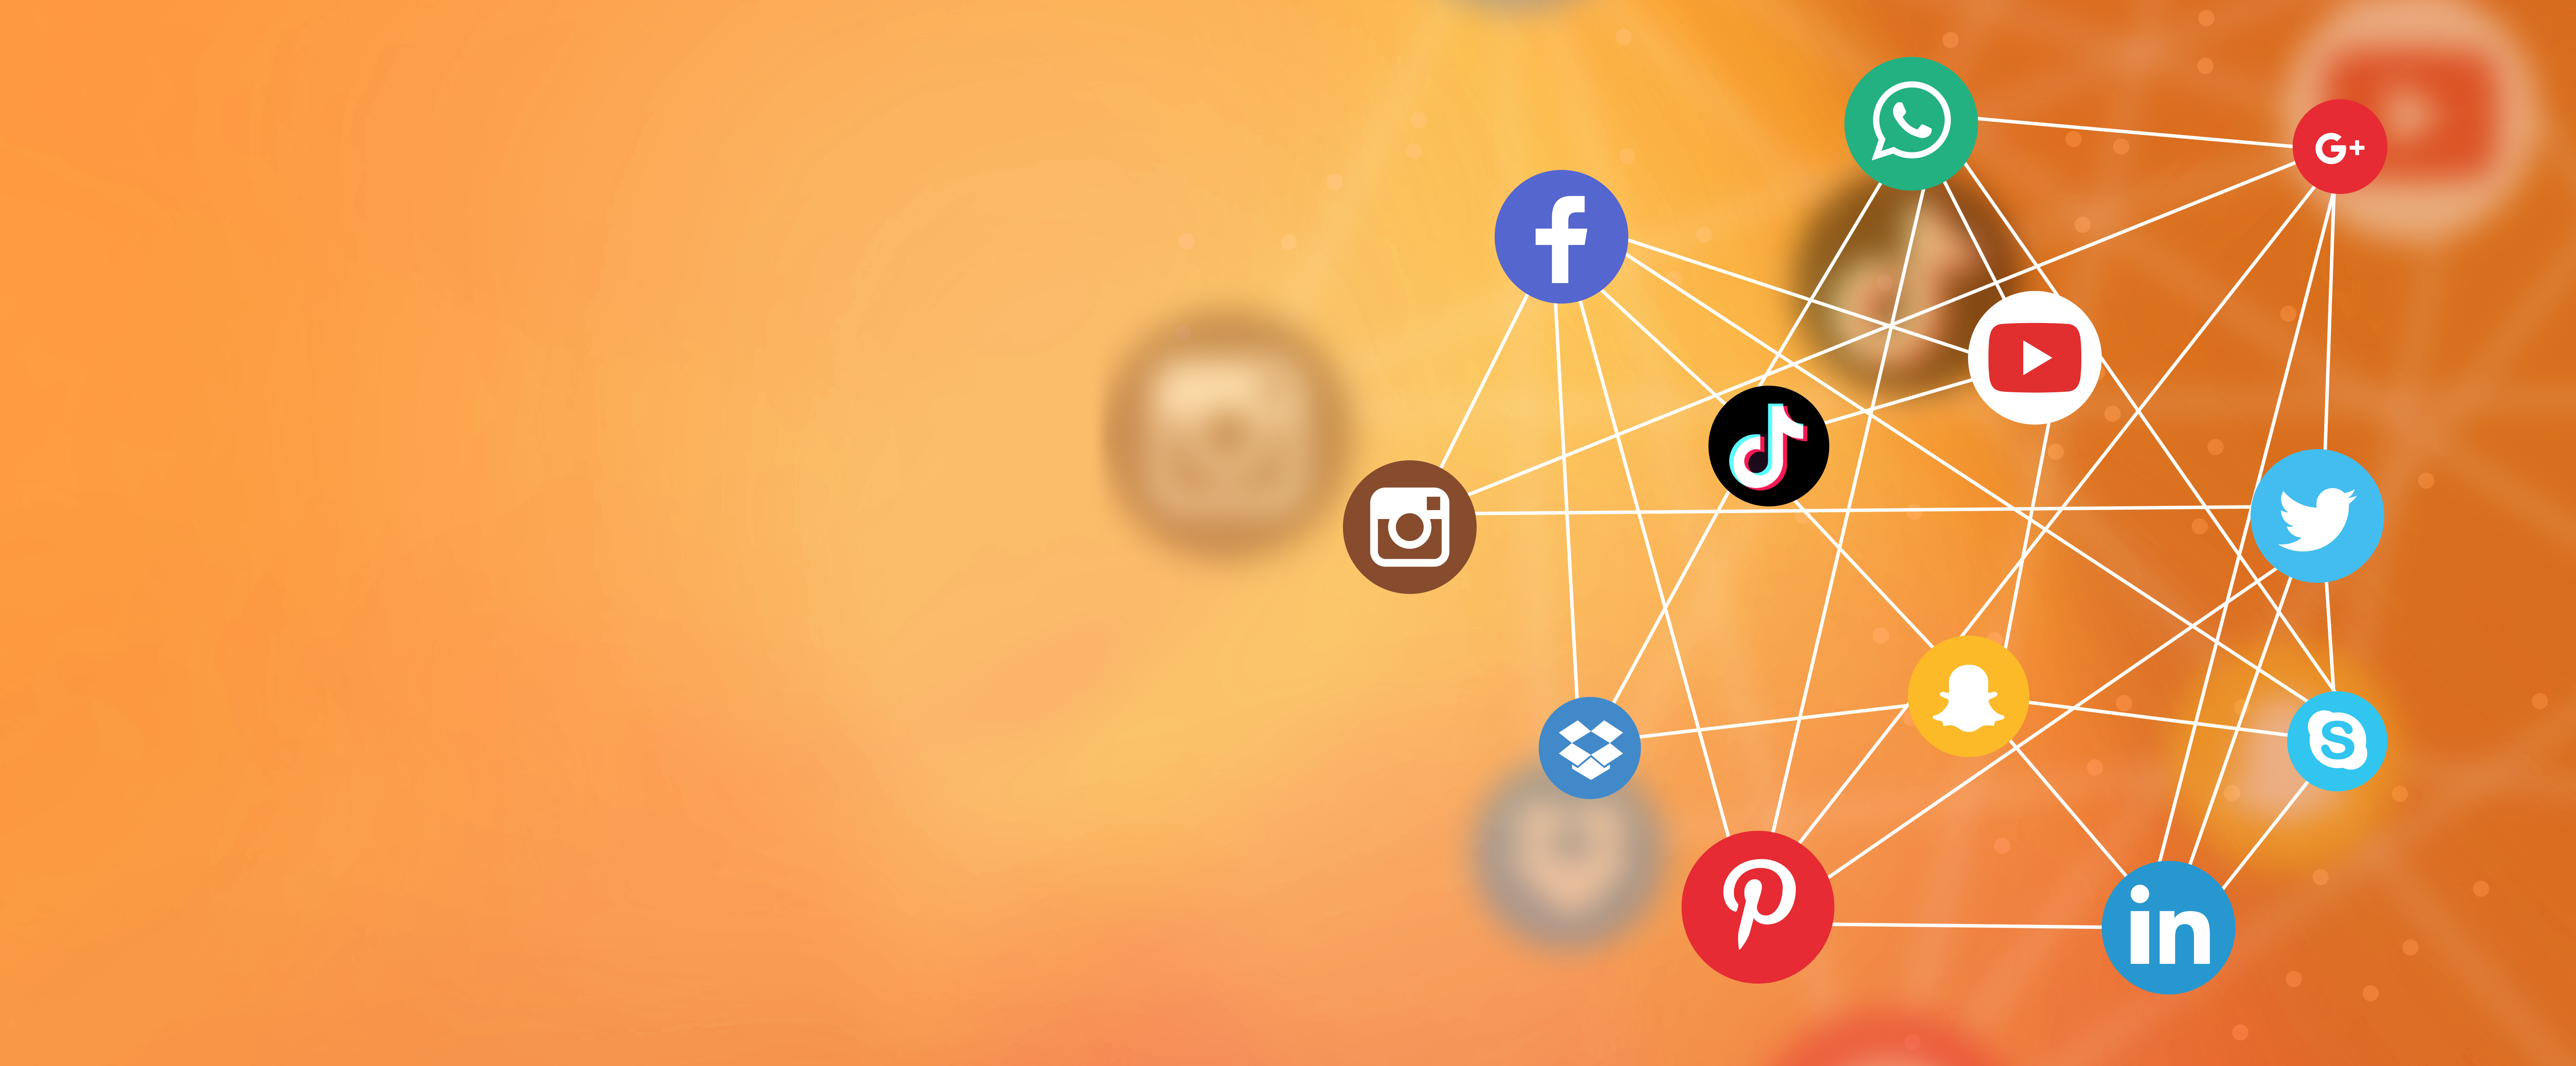 Social media icons connected by  lines on yellow orange background